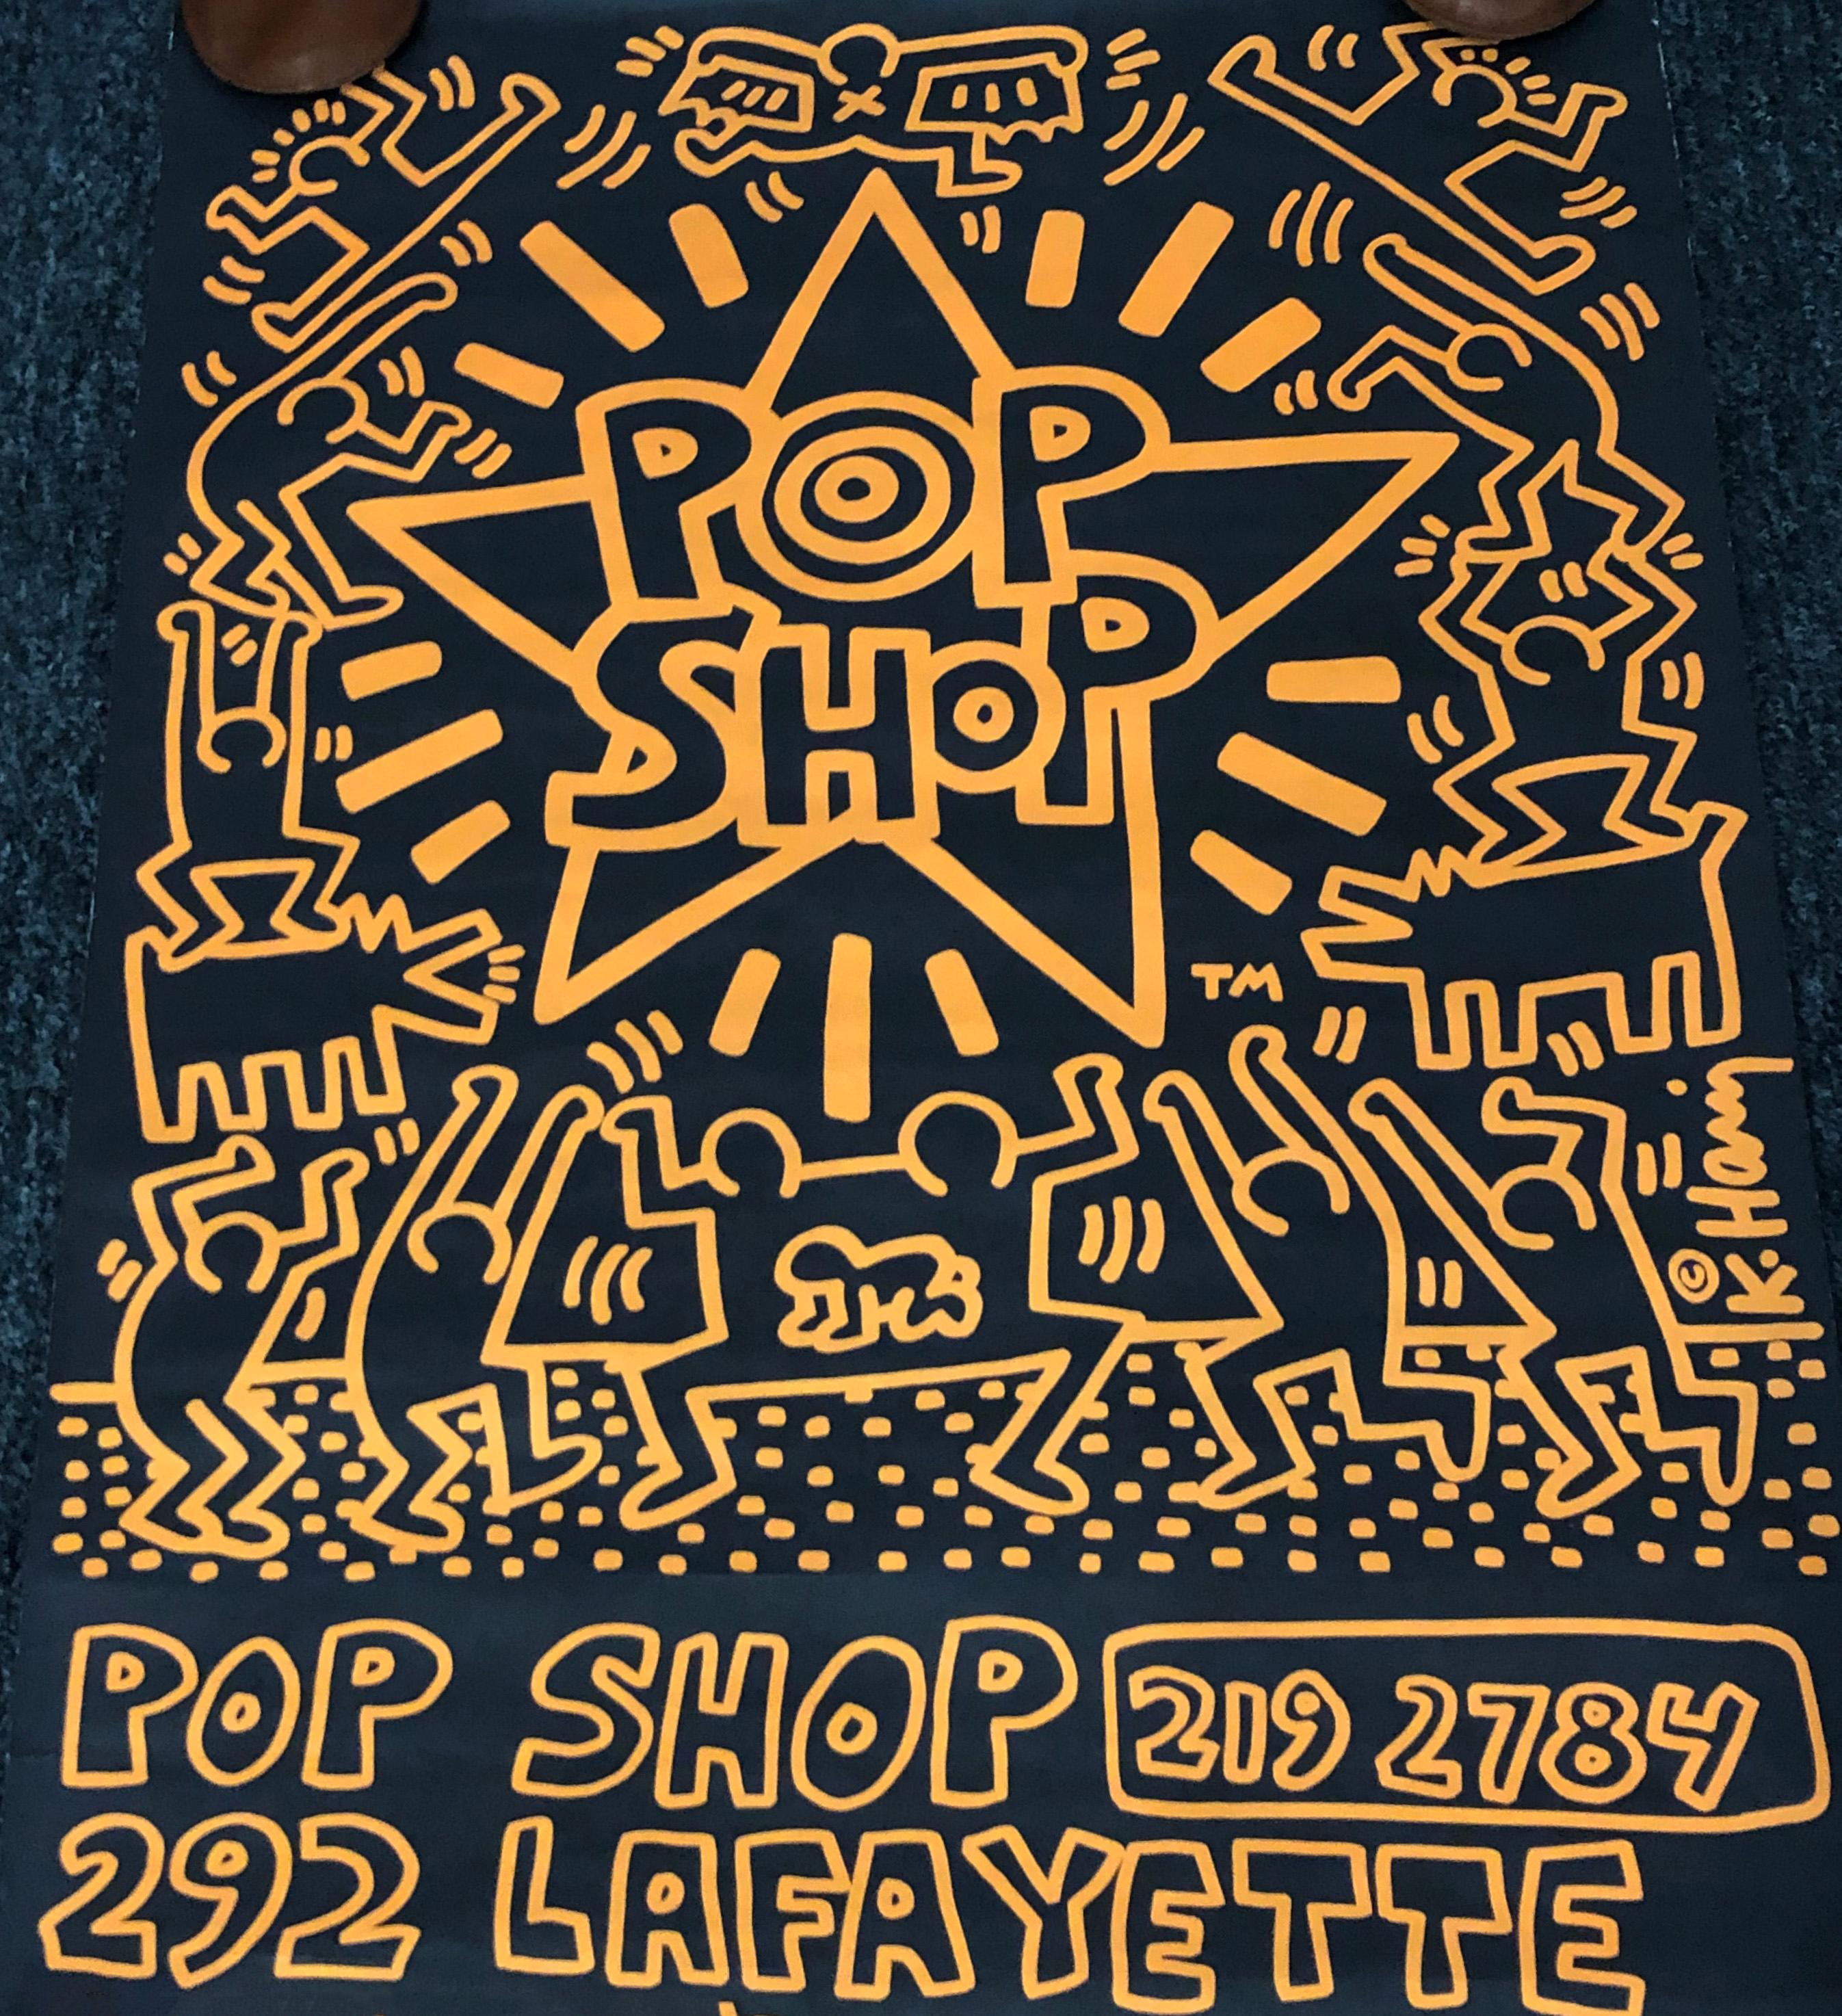 Original Keith Haring illustrated Pop Shop Poster, 1986:

Offset lithograph in black & orange.  
34 x 22 inches. 
Minor signs of handling including some light surface creasing; some corner edge wear on upper; in otherwise good overall condition